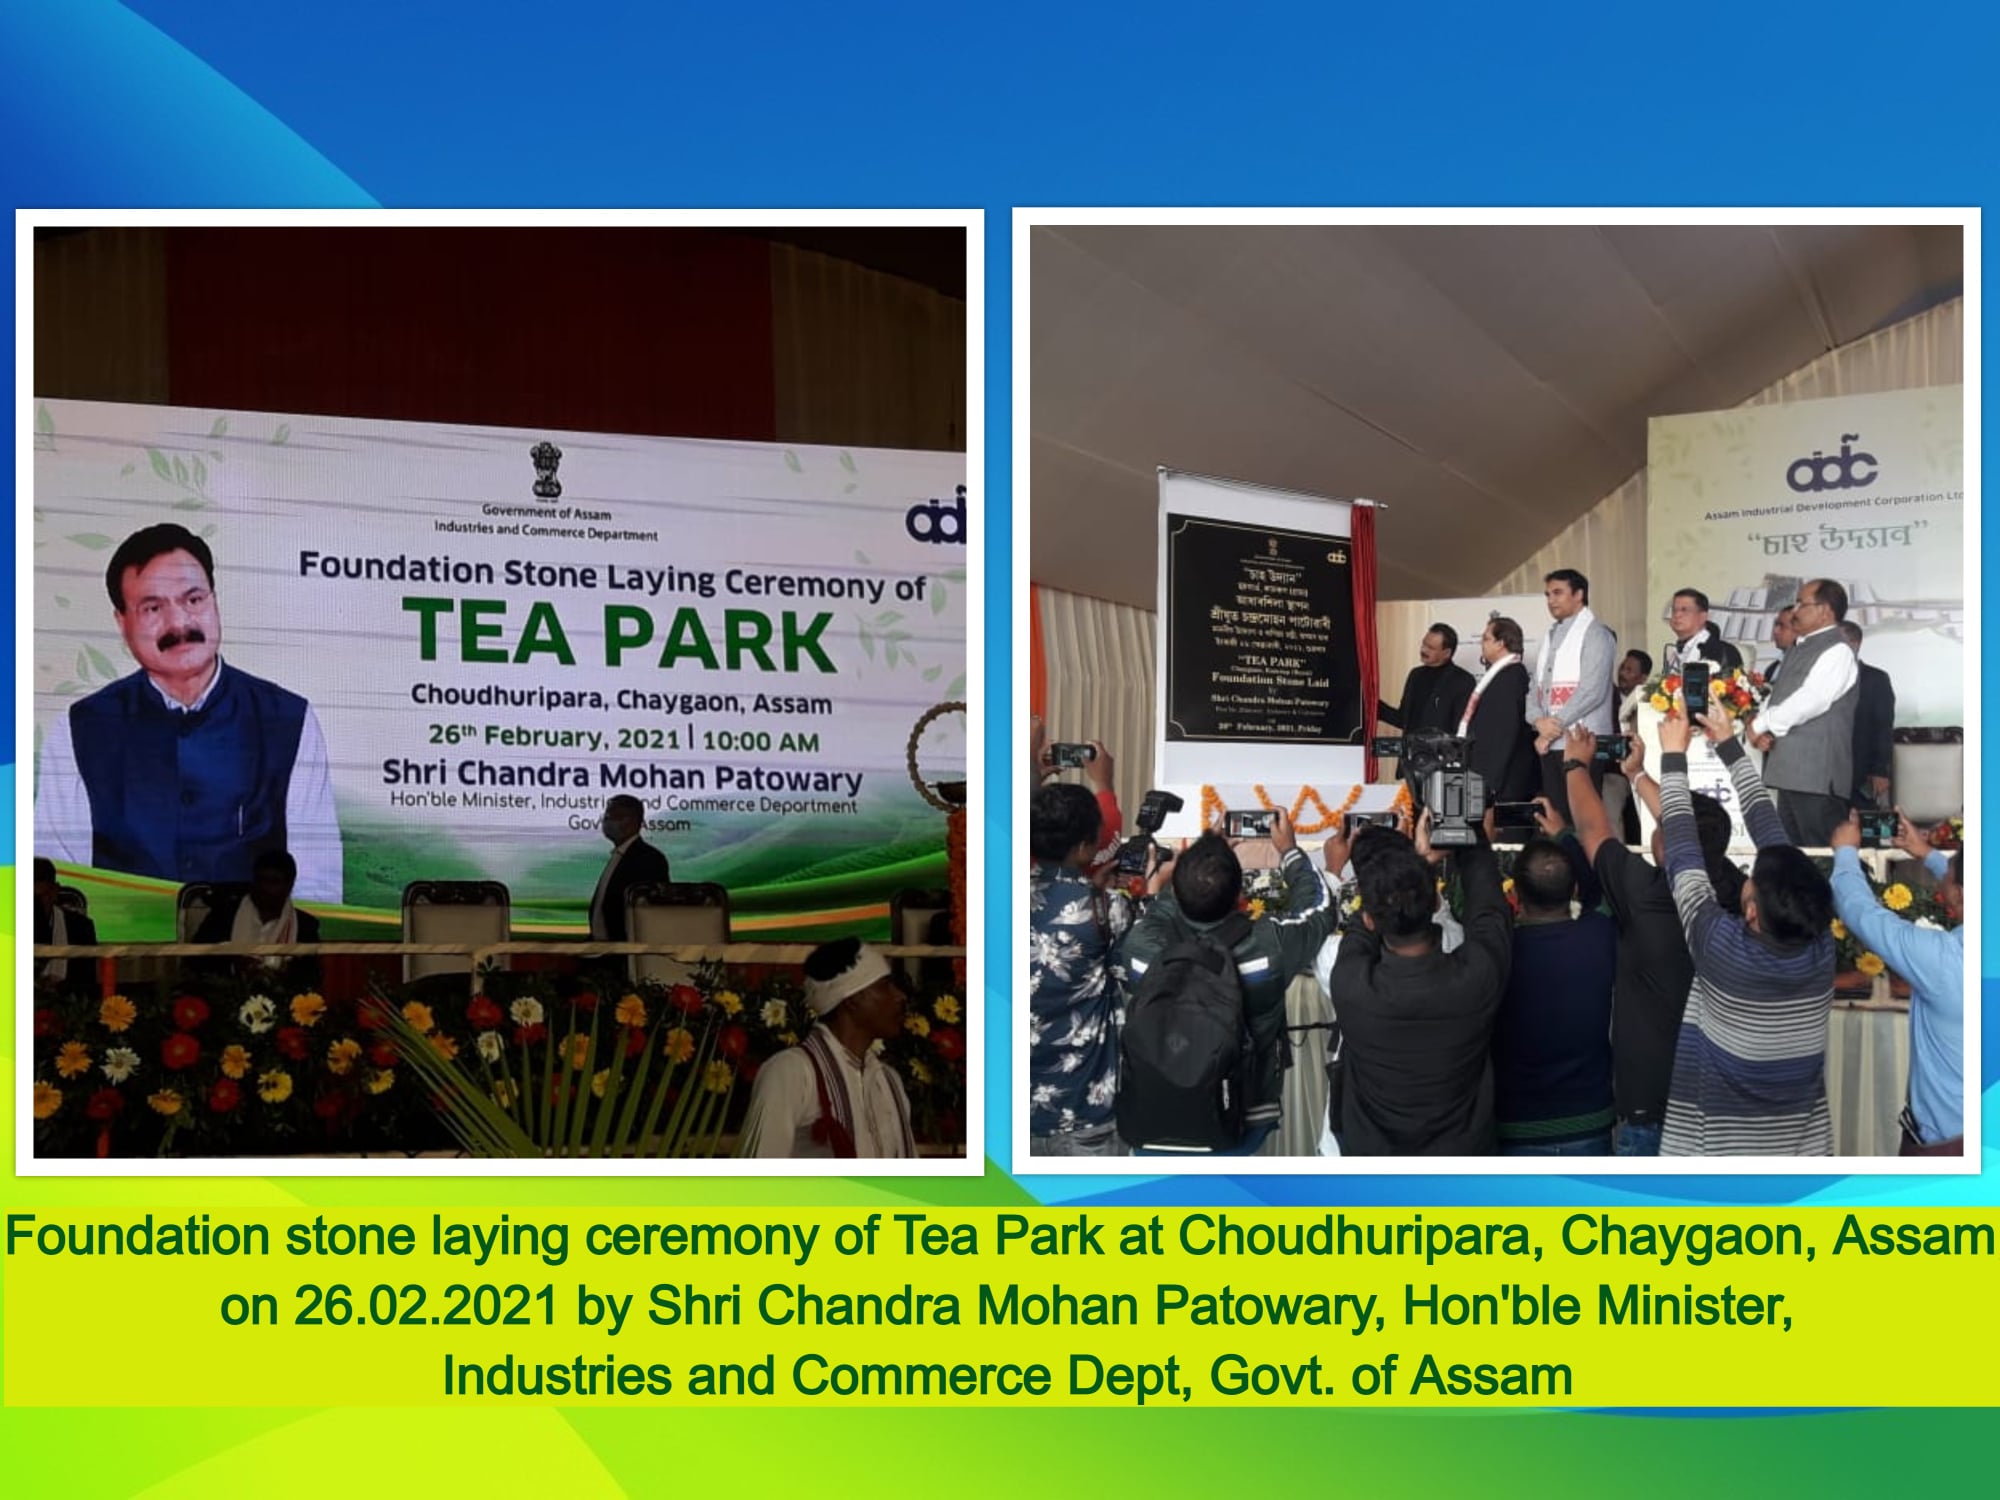 Foundation stone laying ceremony of Tea Park at Choudhuripara, Chaygaon, Assam on 26.02.2021 by Shri Chandra Mohan Patowary, Hon'ble Minister, Industries and Commerece Dept, Govt. of Assam